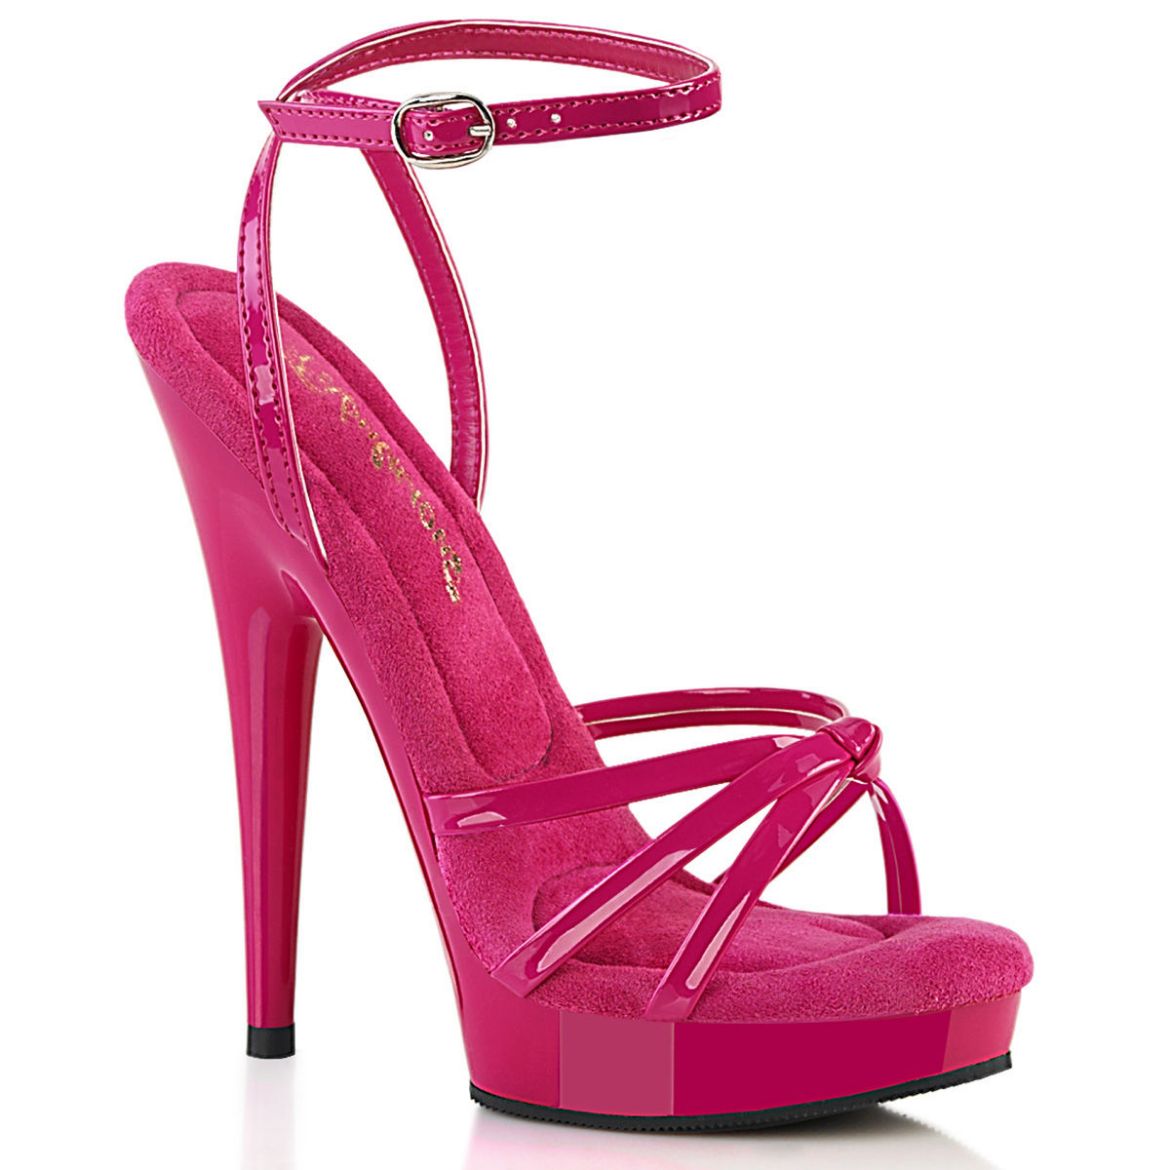 Image of Fabulicious SULTRY-638 H. Pink Pat/H. Pink 6 Inch Heel 1 Inch PF Wrap Around Knotted Strap Sandal